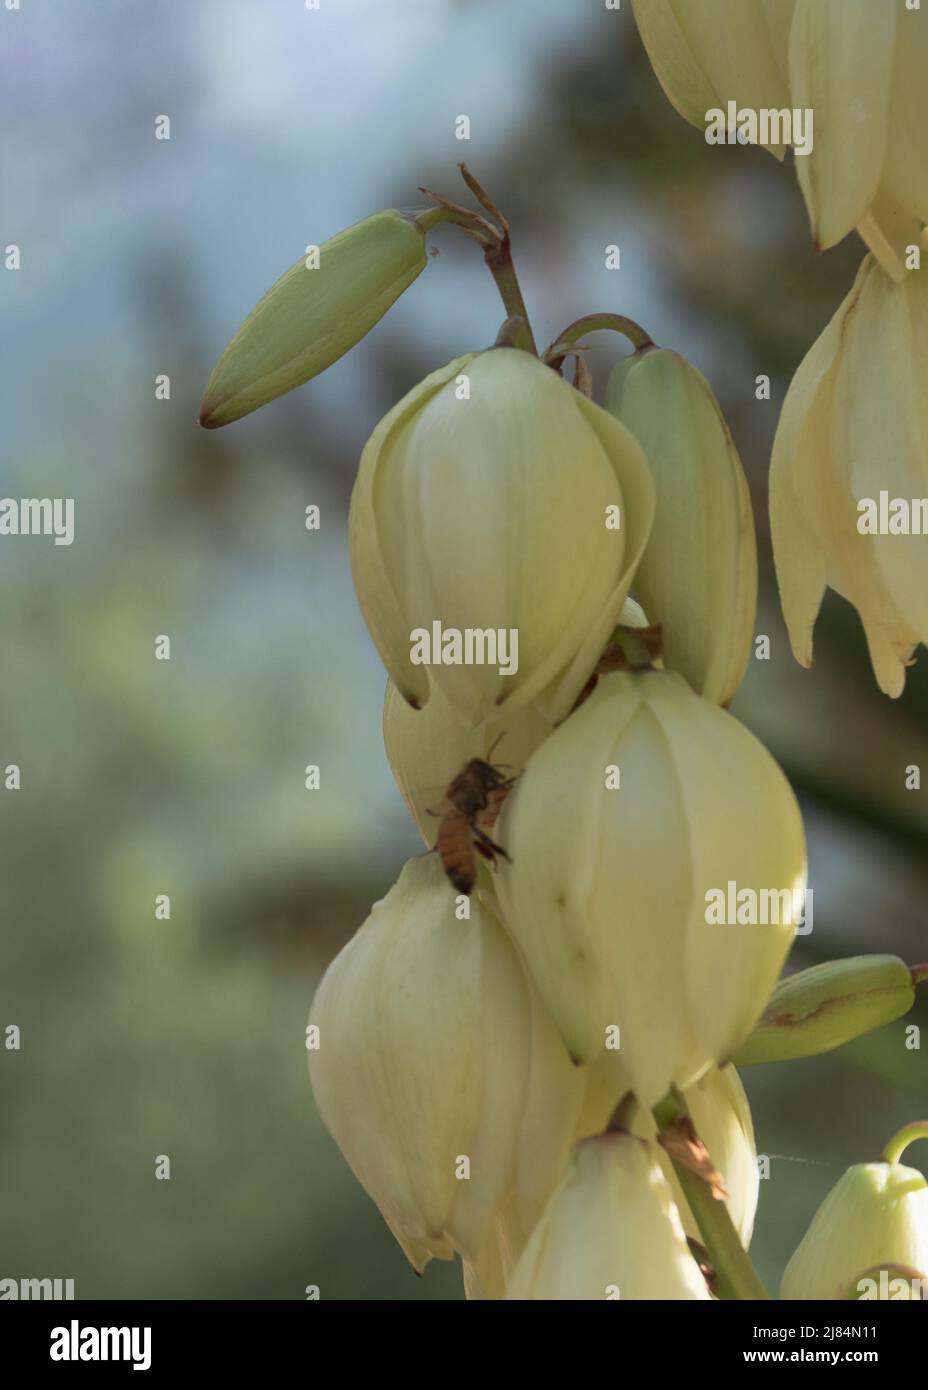 Flowers, creamy yellow white blooms of the Yucca plant on their scape or spire, flowering in an Australian country garden, NSW Australia Stock Photo